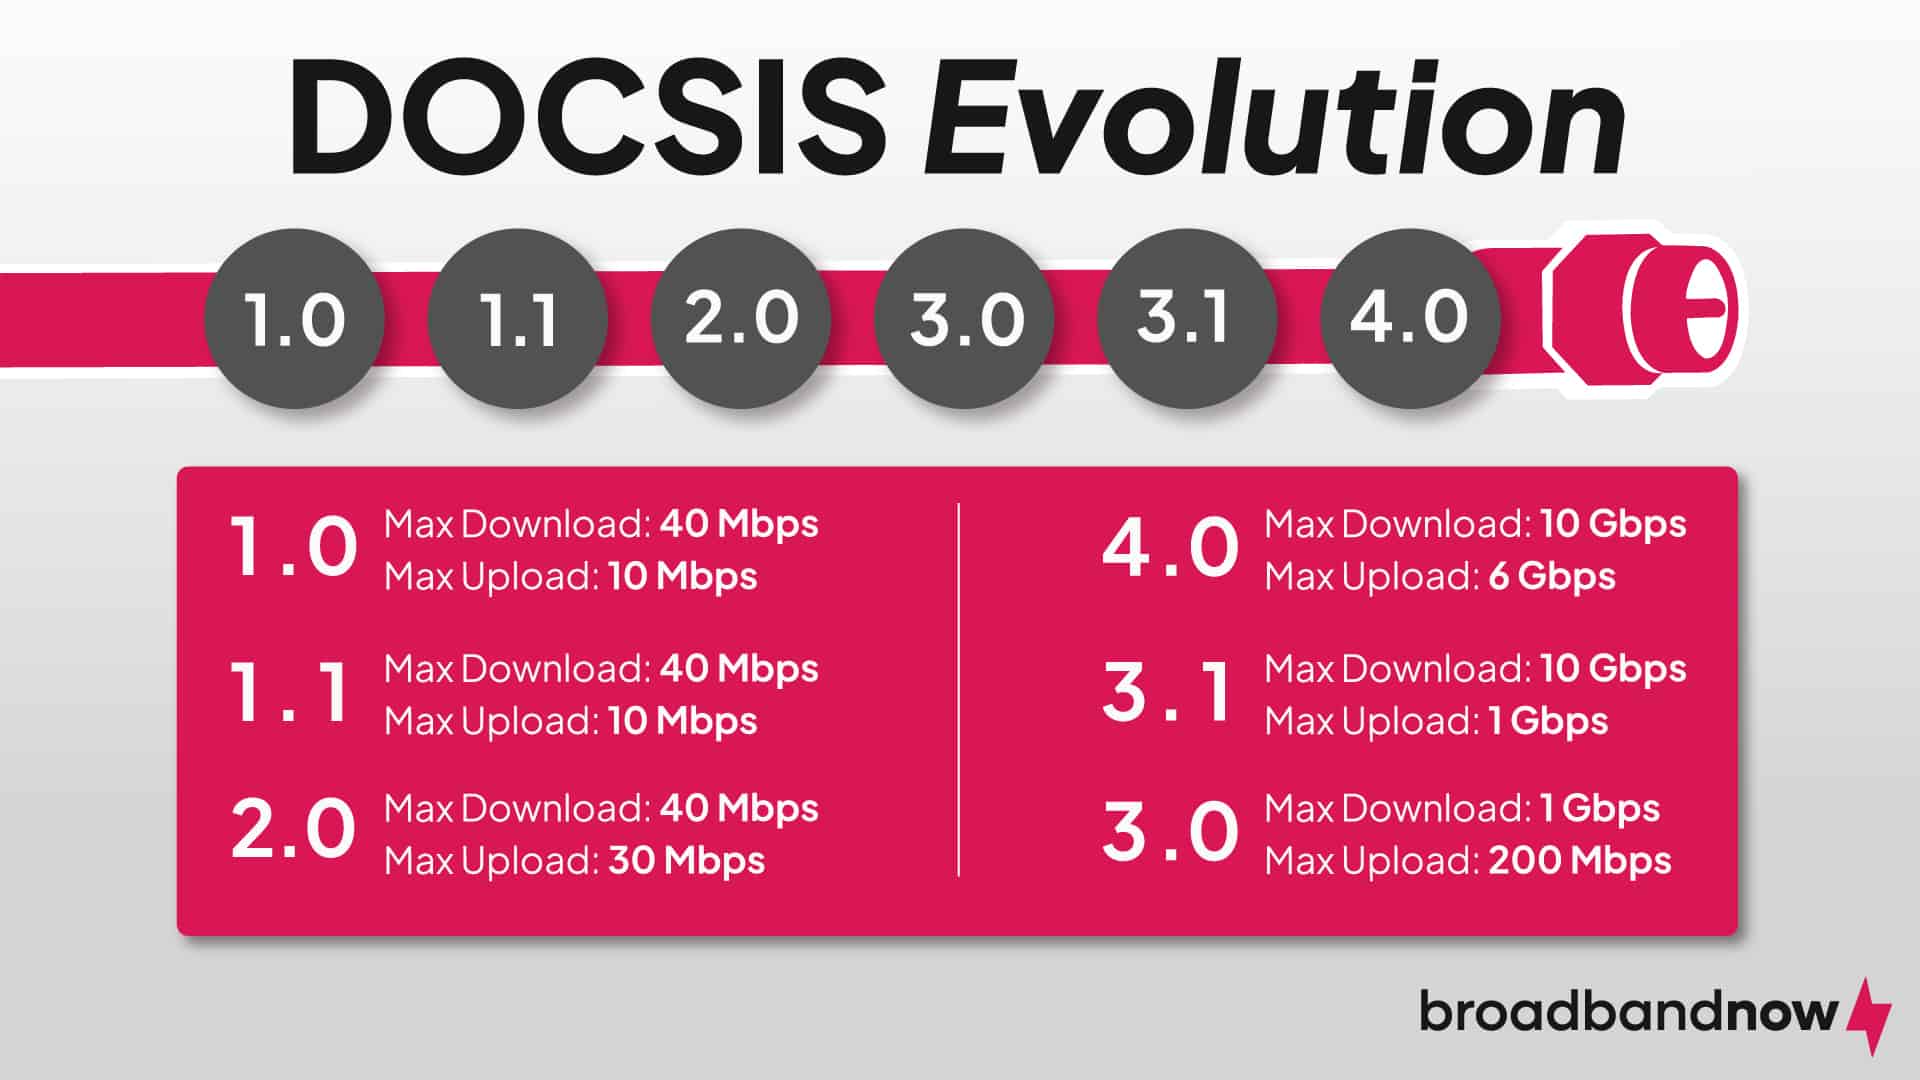 Table showing the evolution of DOCSIS speeds